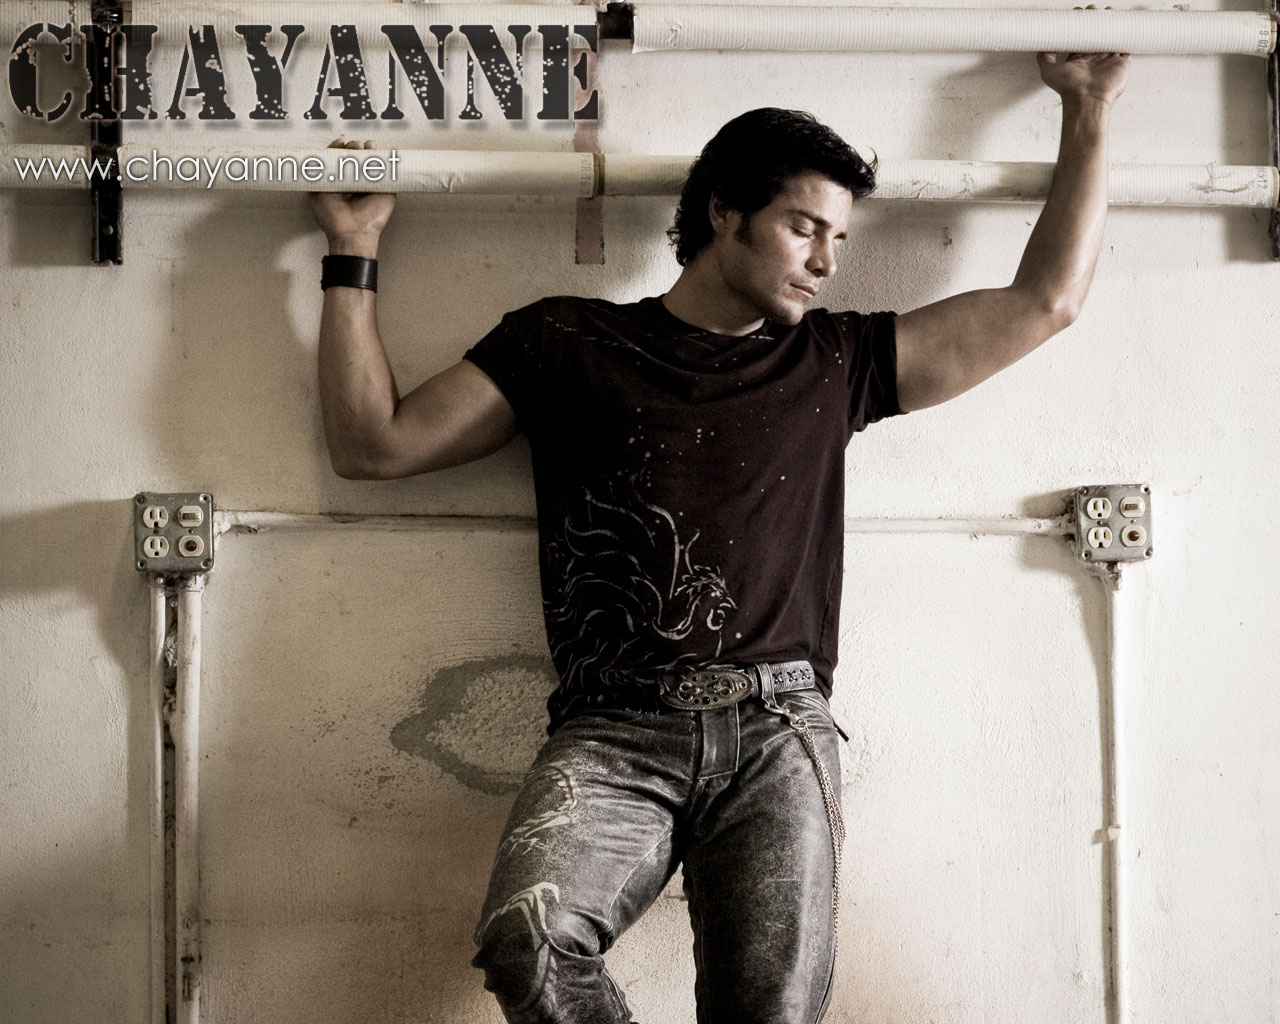 Download High quality Chayanne wallpaper / Celebrities Male / 1280x1024